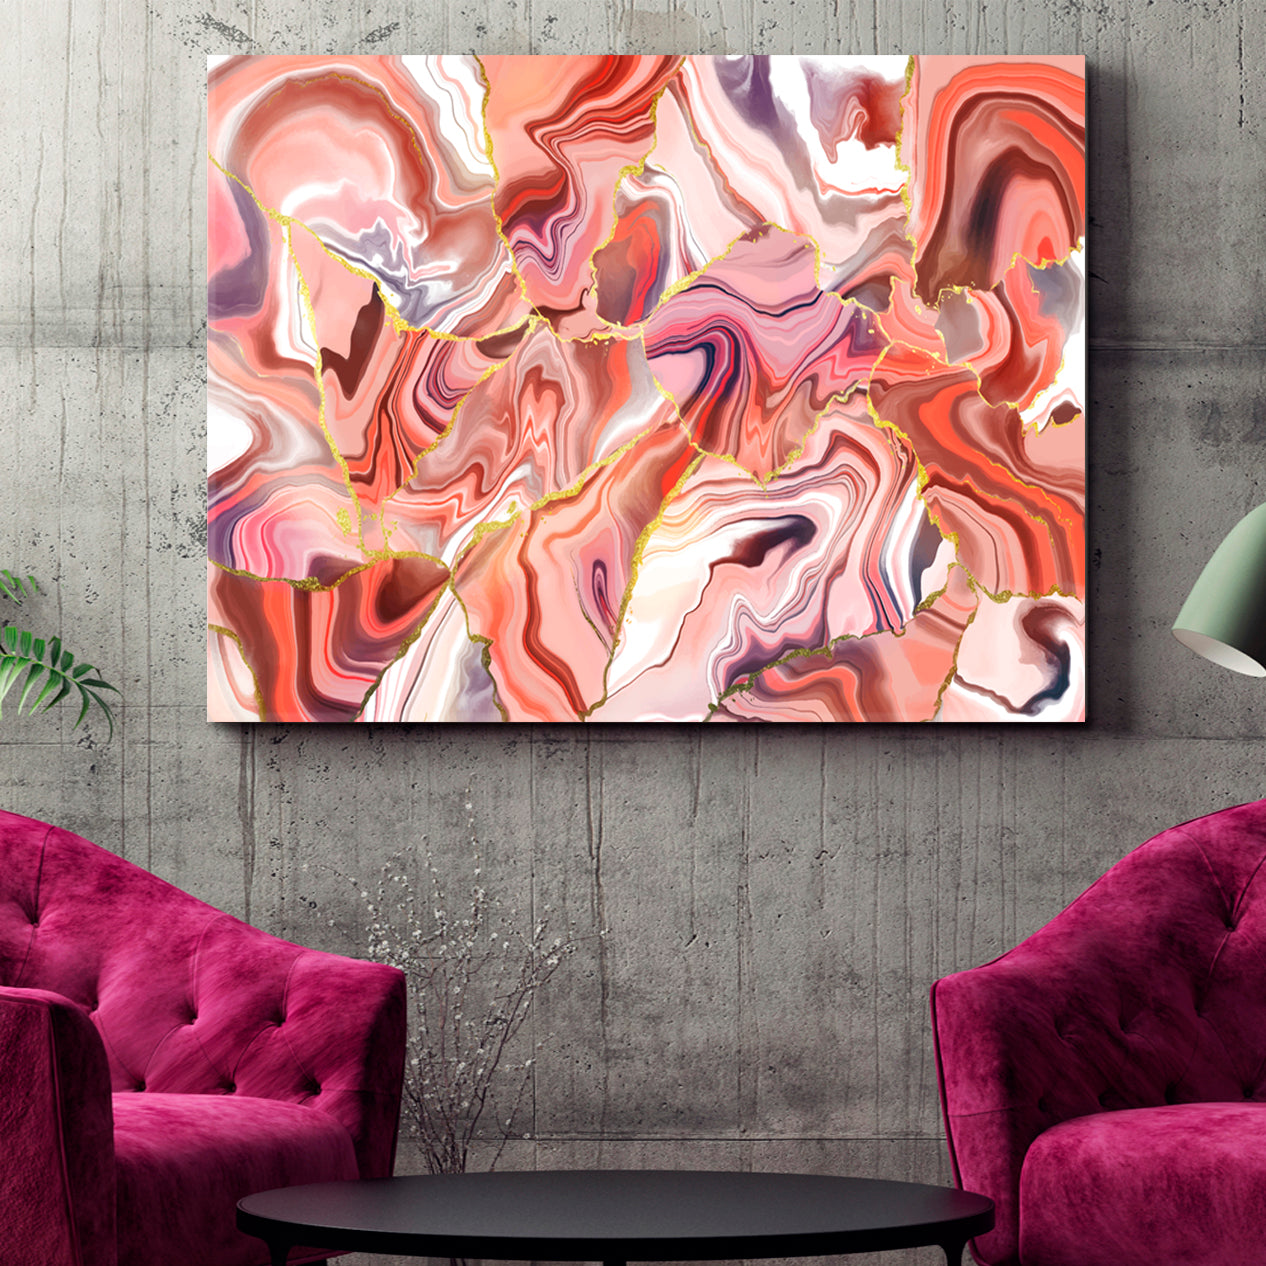 Coral Peachy Beige Mix Abstract Wavy Forms Fractal Futuristic Pattern Contemporary Art Artesty   